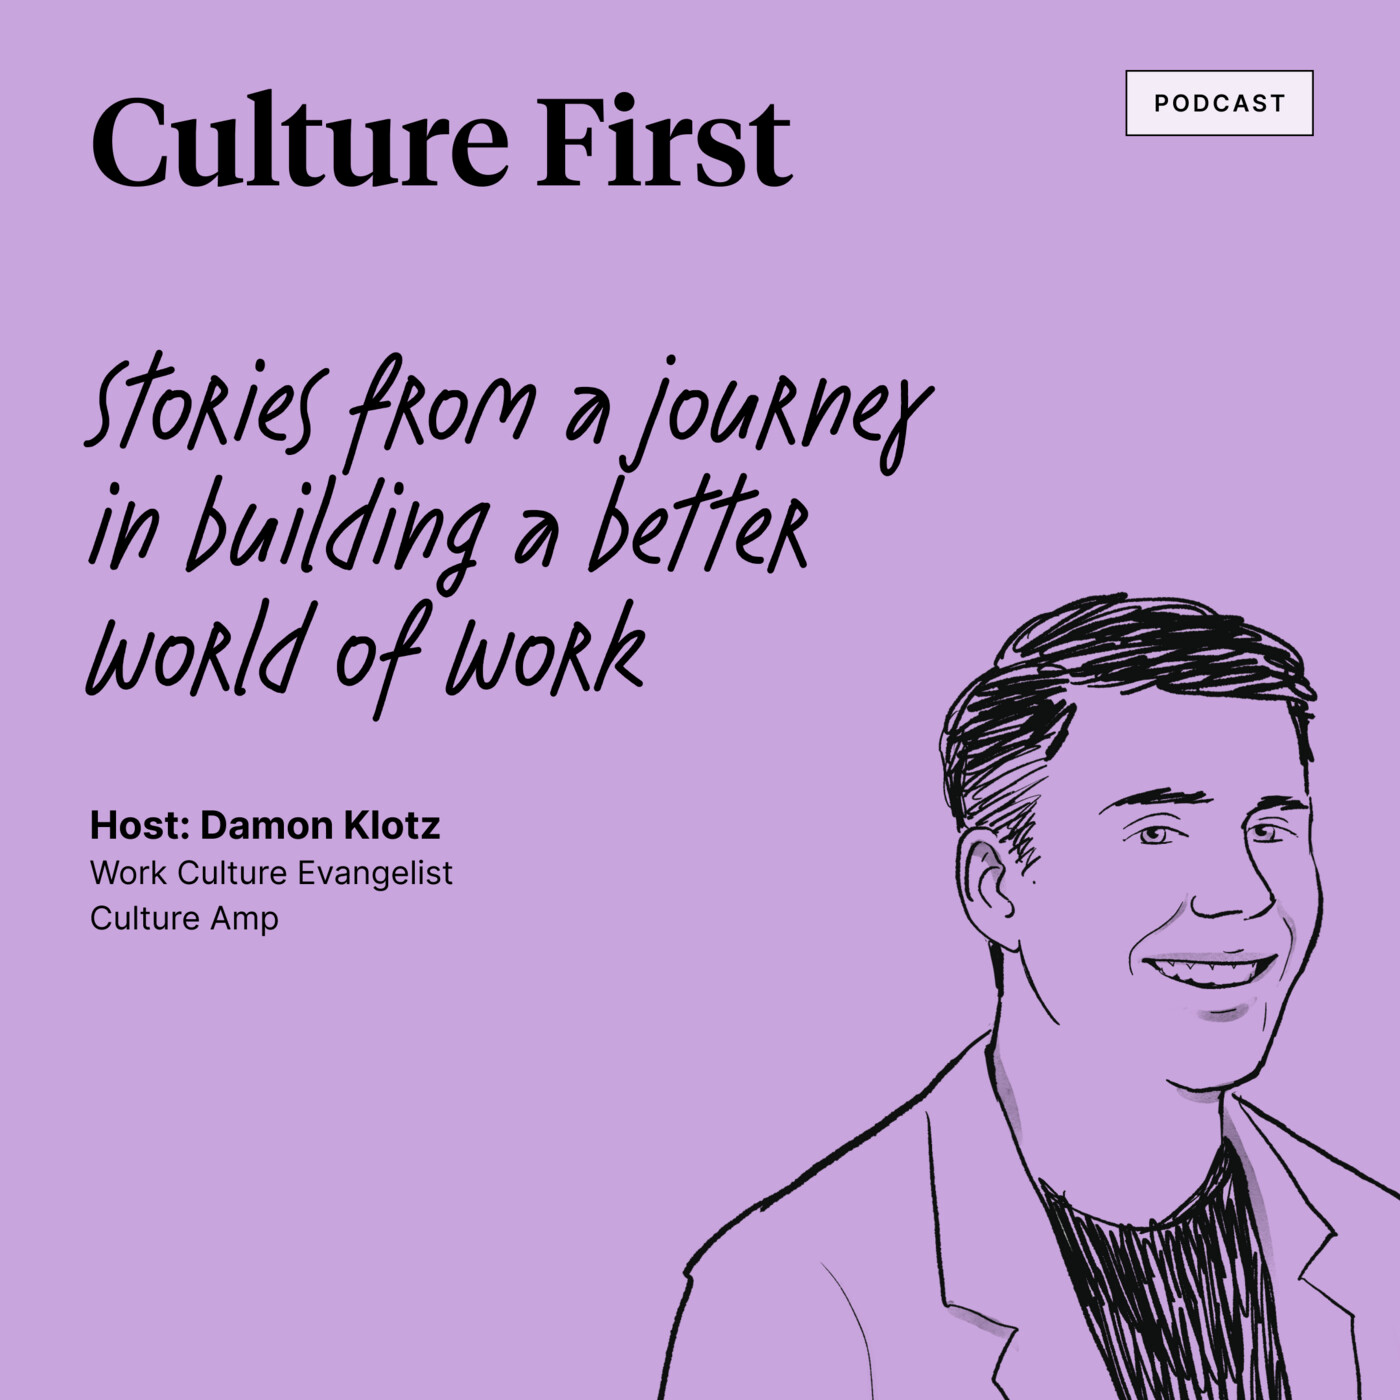 Introducing the Culture First Podcast